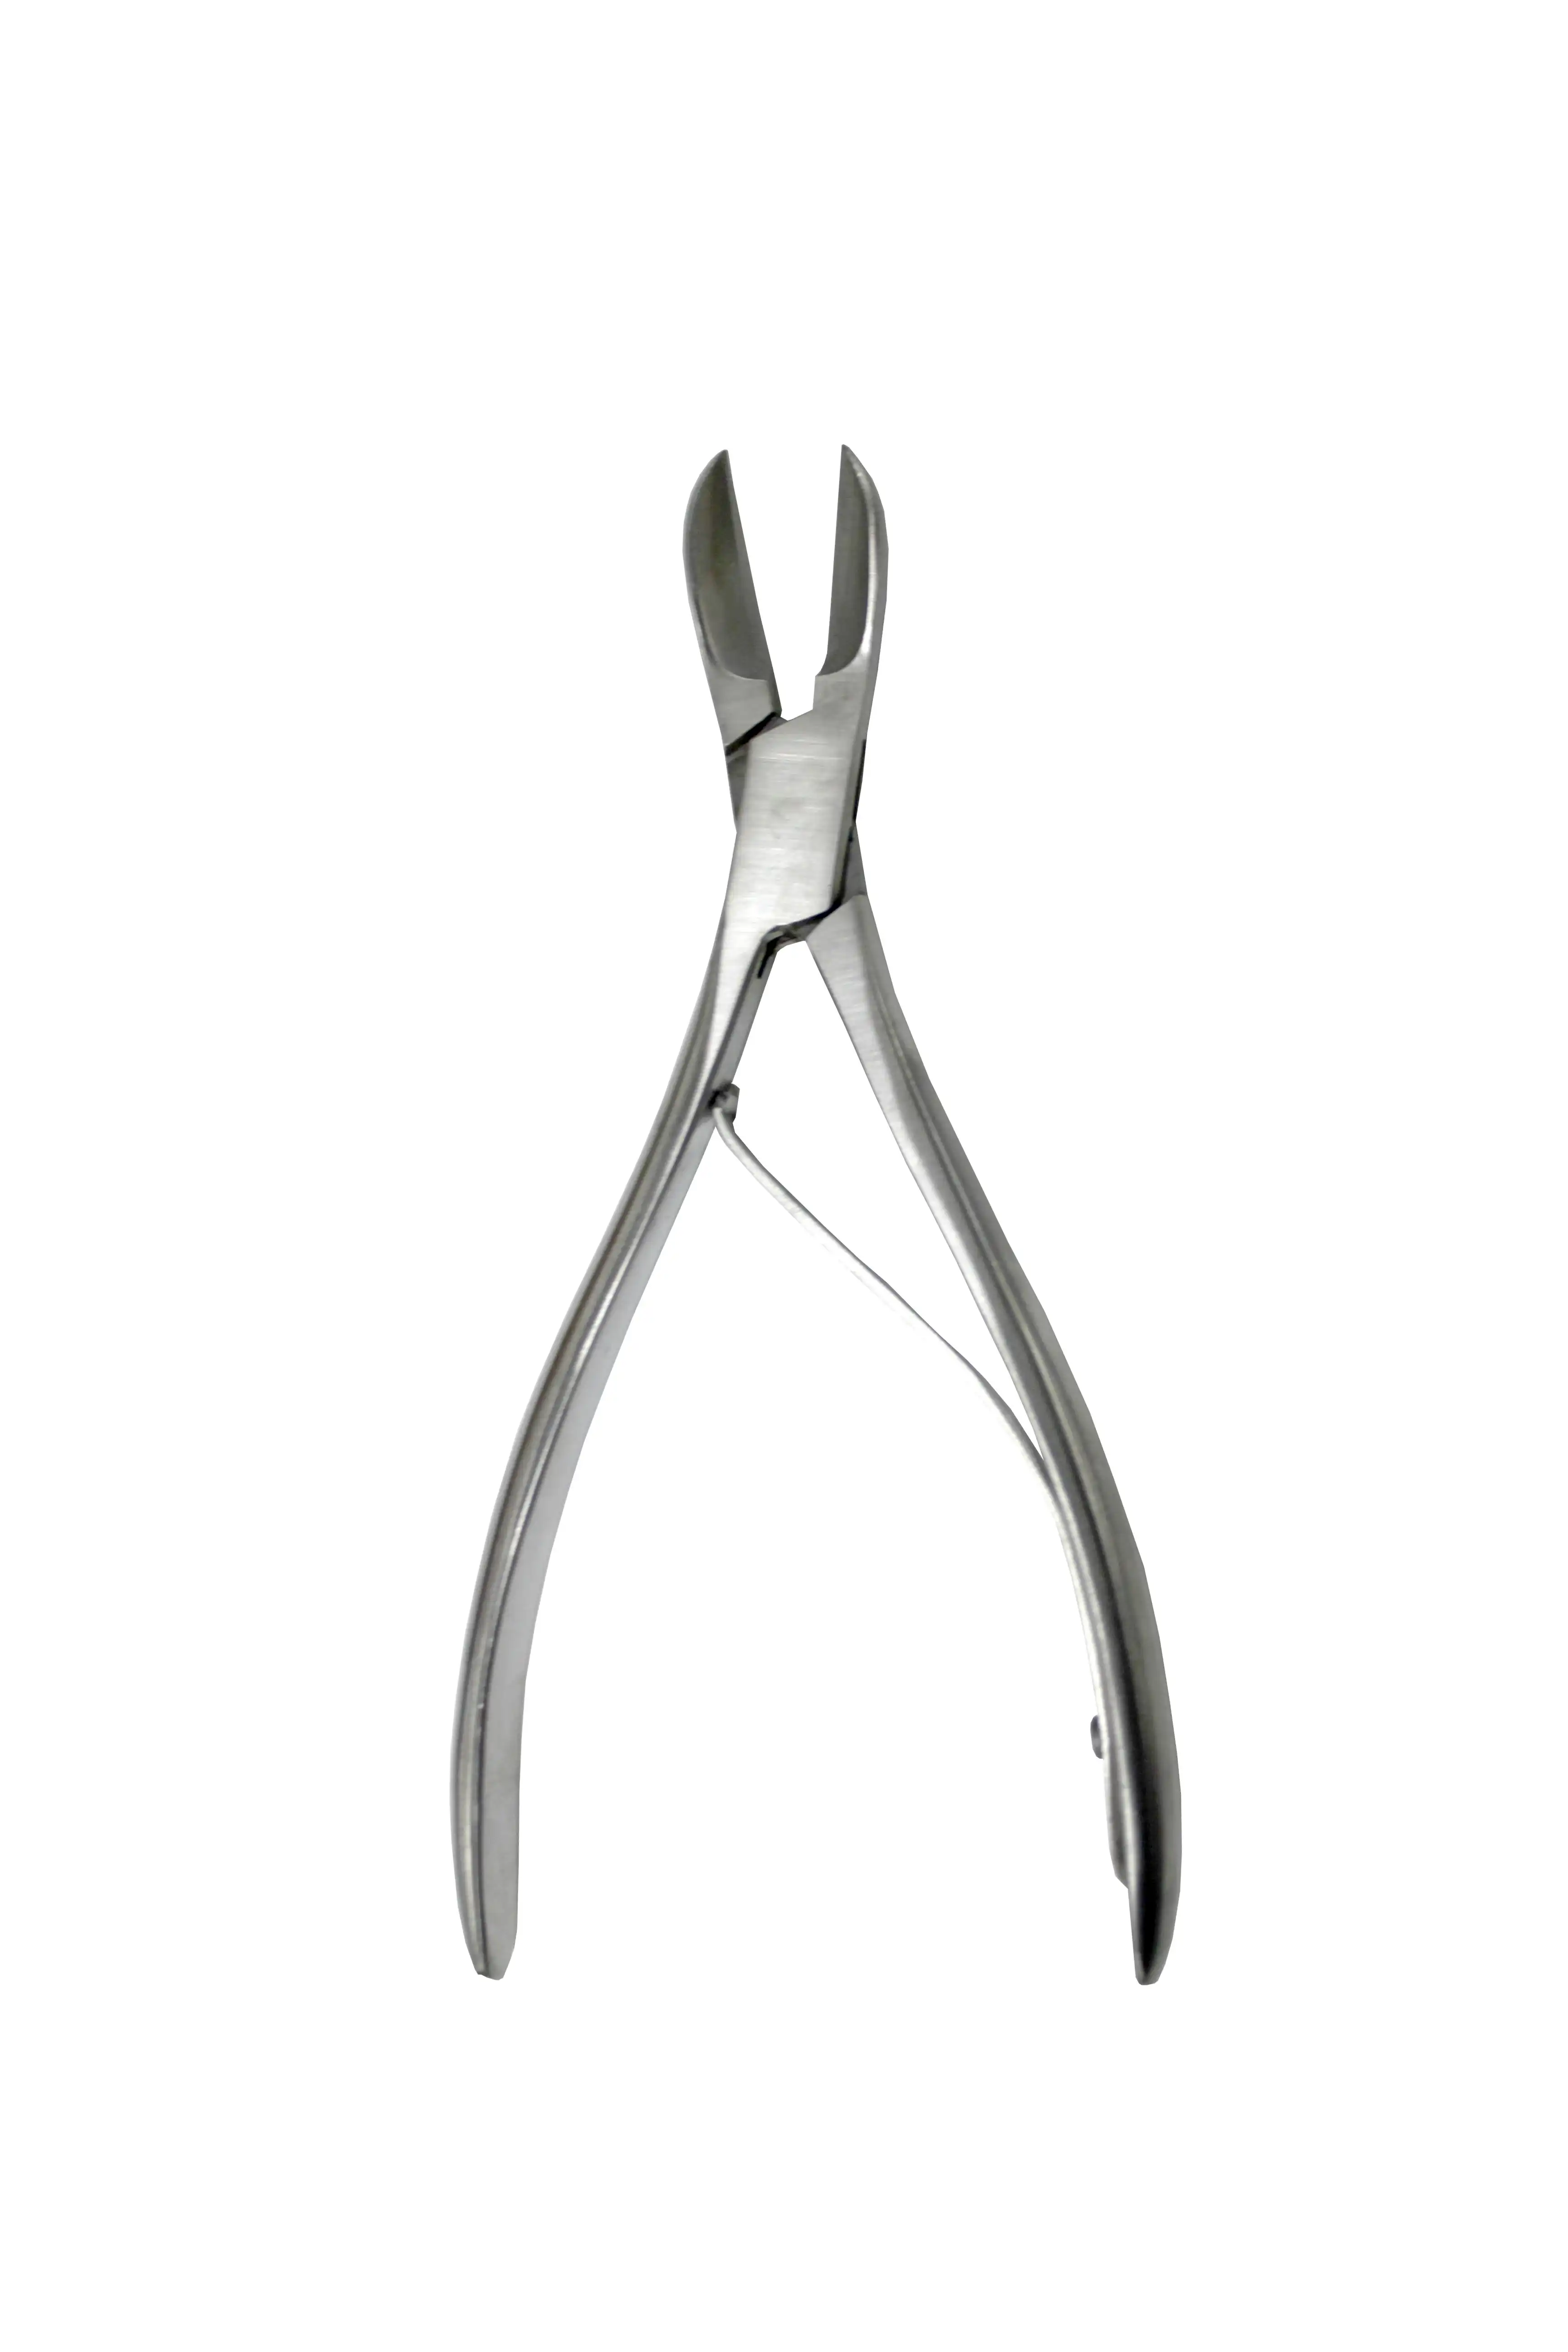 Livingstone Bone Cutter or Nail Clipper 160mm Long 23.4mm Curved Jaw Smooth Handle One Arm 89.7g